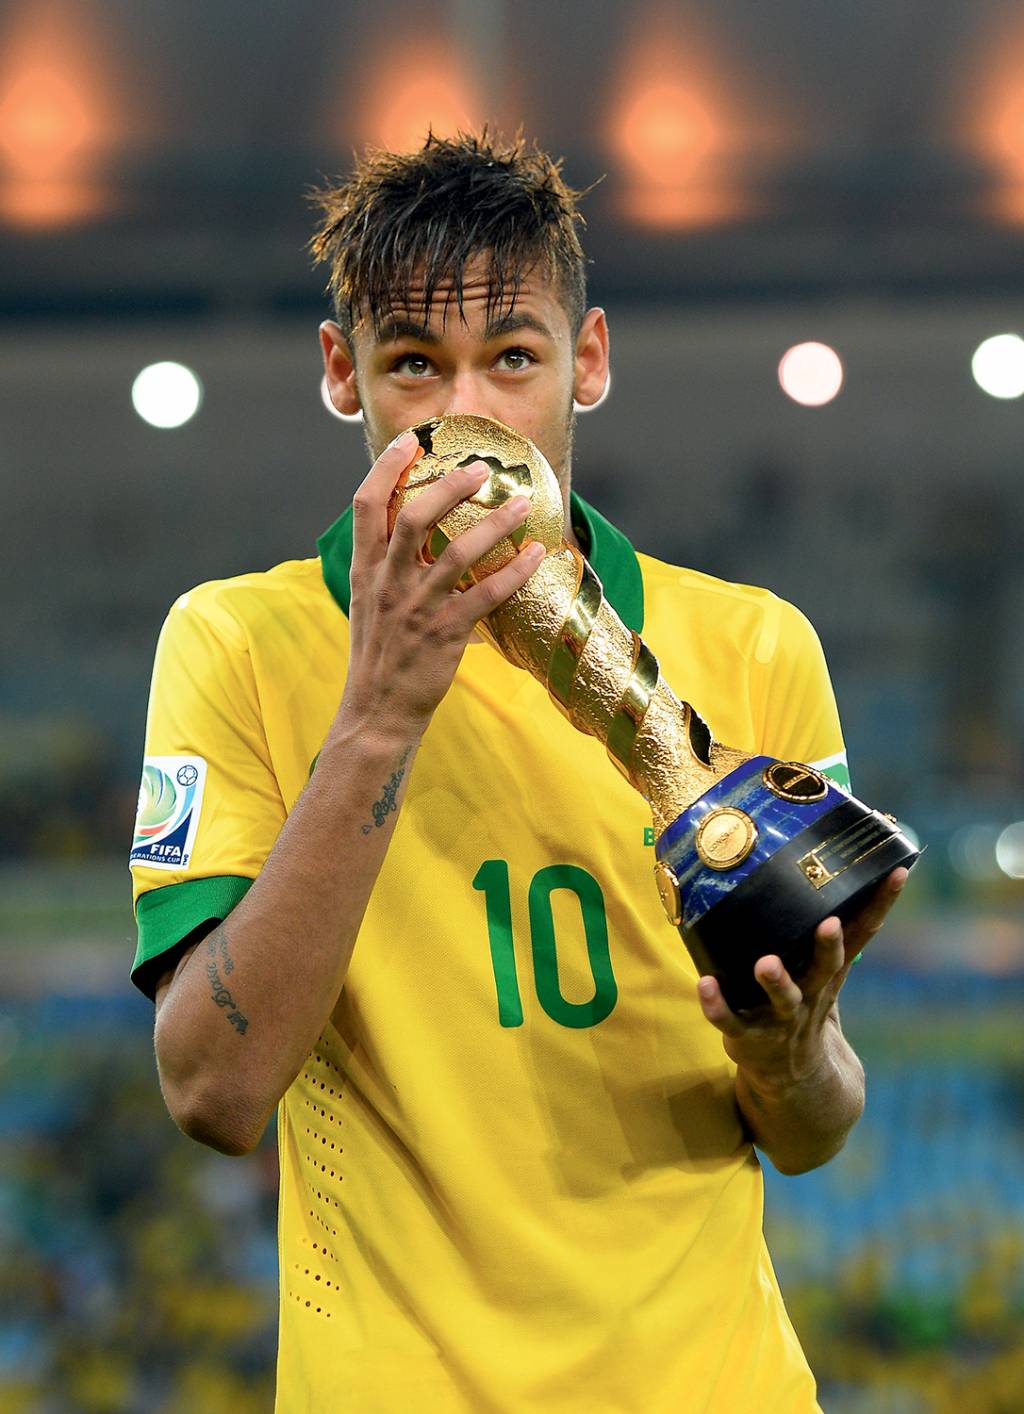 RIO DE JANEIRO, BRAZIL - JUNE 30: Neymar of Brazil kisses the FIFA Confederations Cup trophy after the FIFA Confederations Cup Brazil 2013 Final match between Brazil and Spain at Maracana on June 30, 2013 in Rio de Janeiro, Brazil. (Photo by Laurence Griffiths/Getty Images)